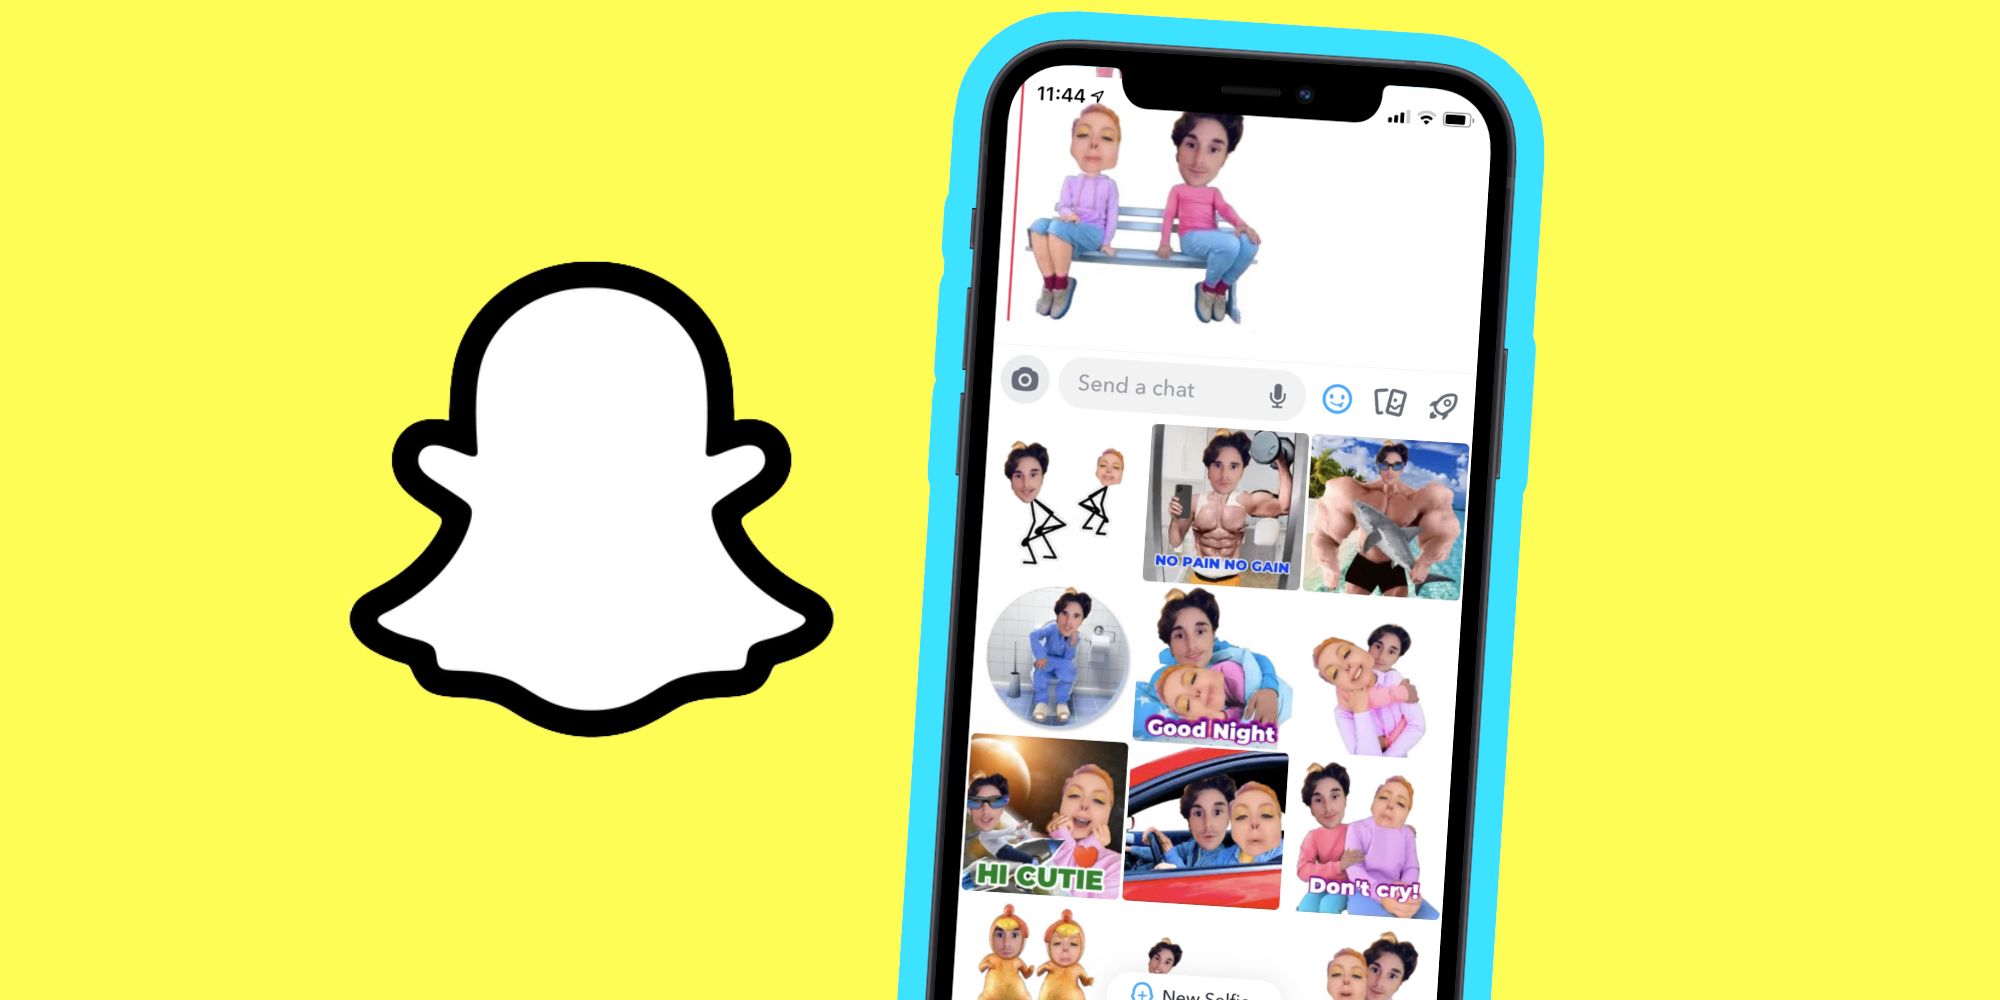 iPhone running the Snapchat app, showing the Cameos feature